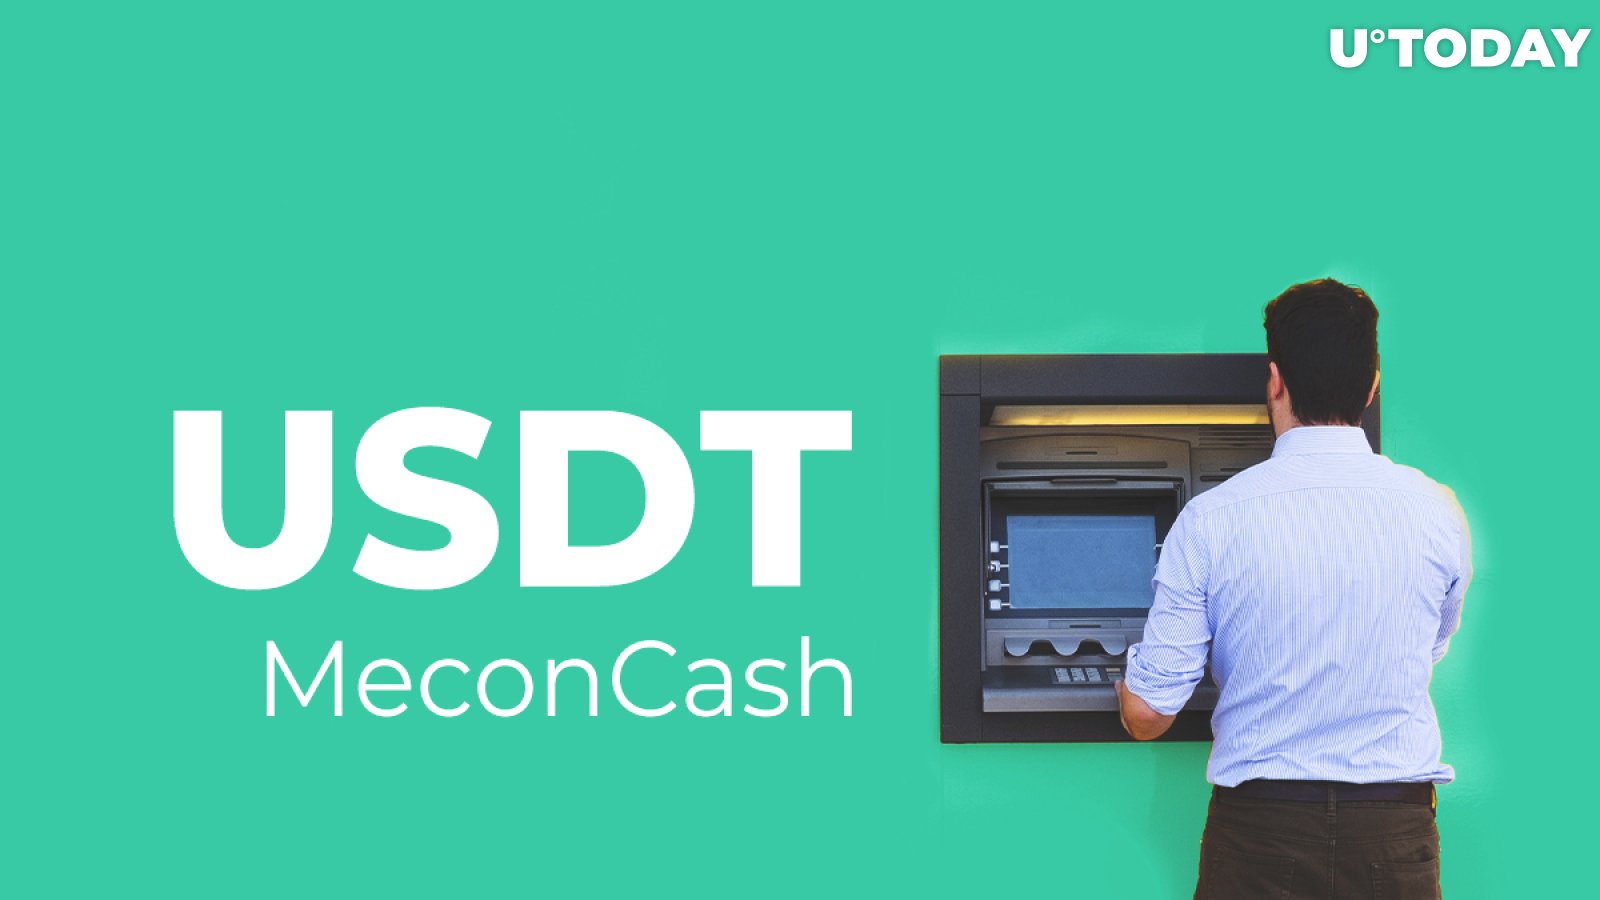 USDT Now Available in Over 13,600 Bitcoin ATMs After Tether's Partnership with MeconCash